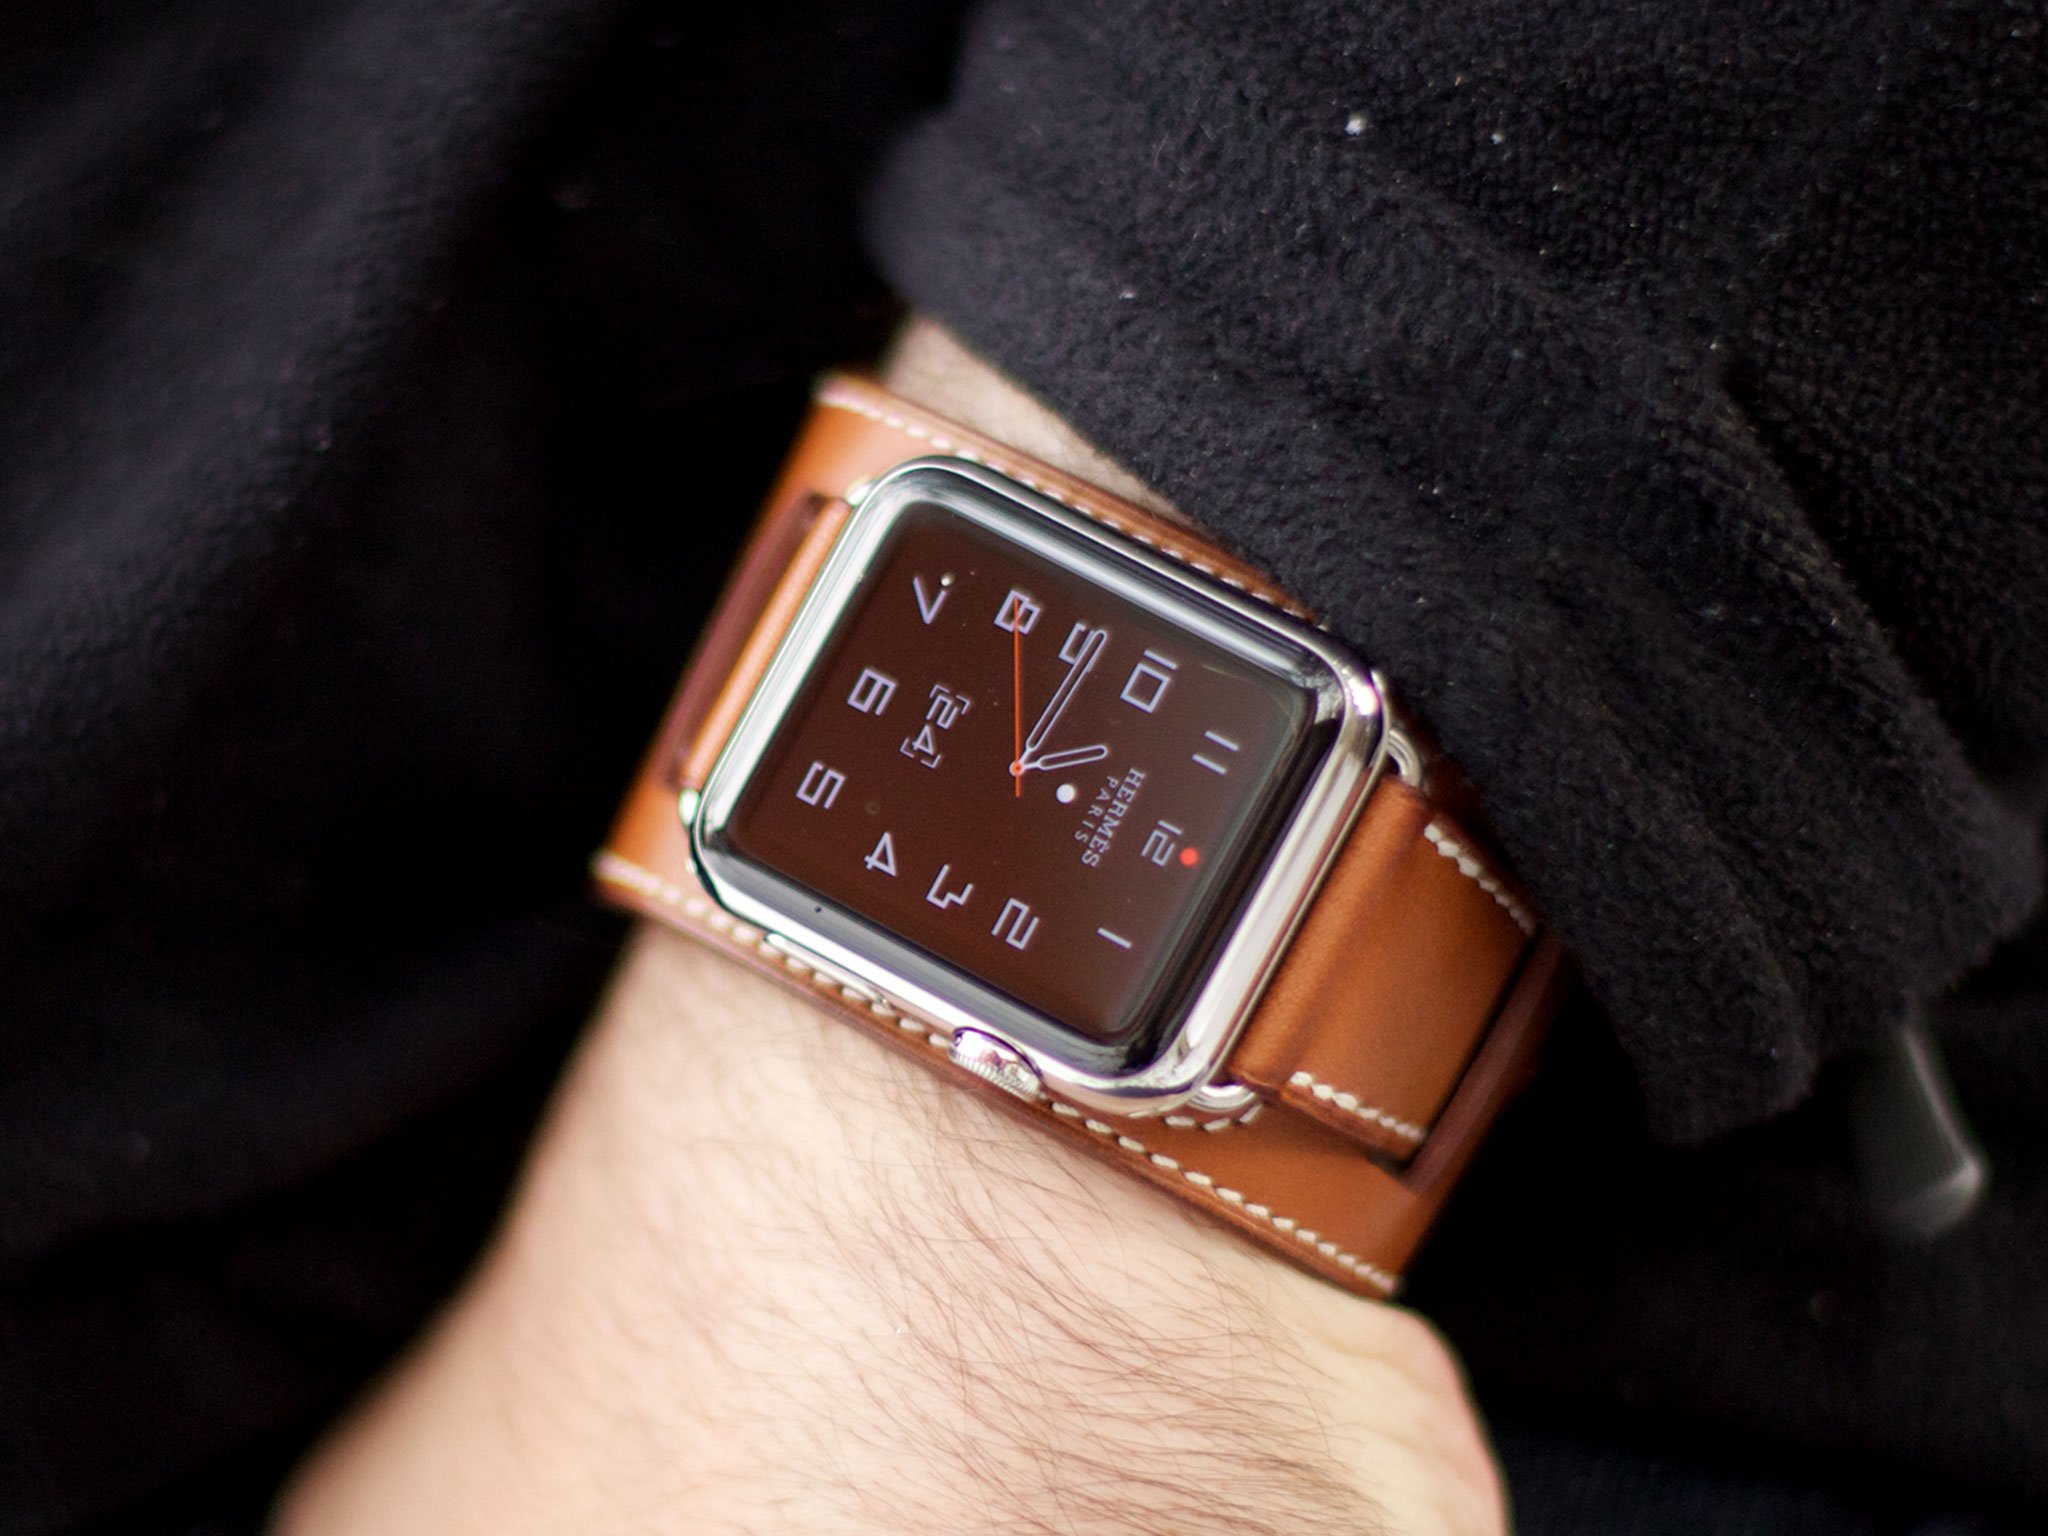 This is the Apple Watch Hermès cuff | iMore